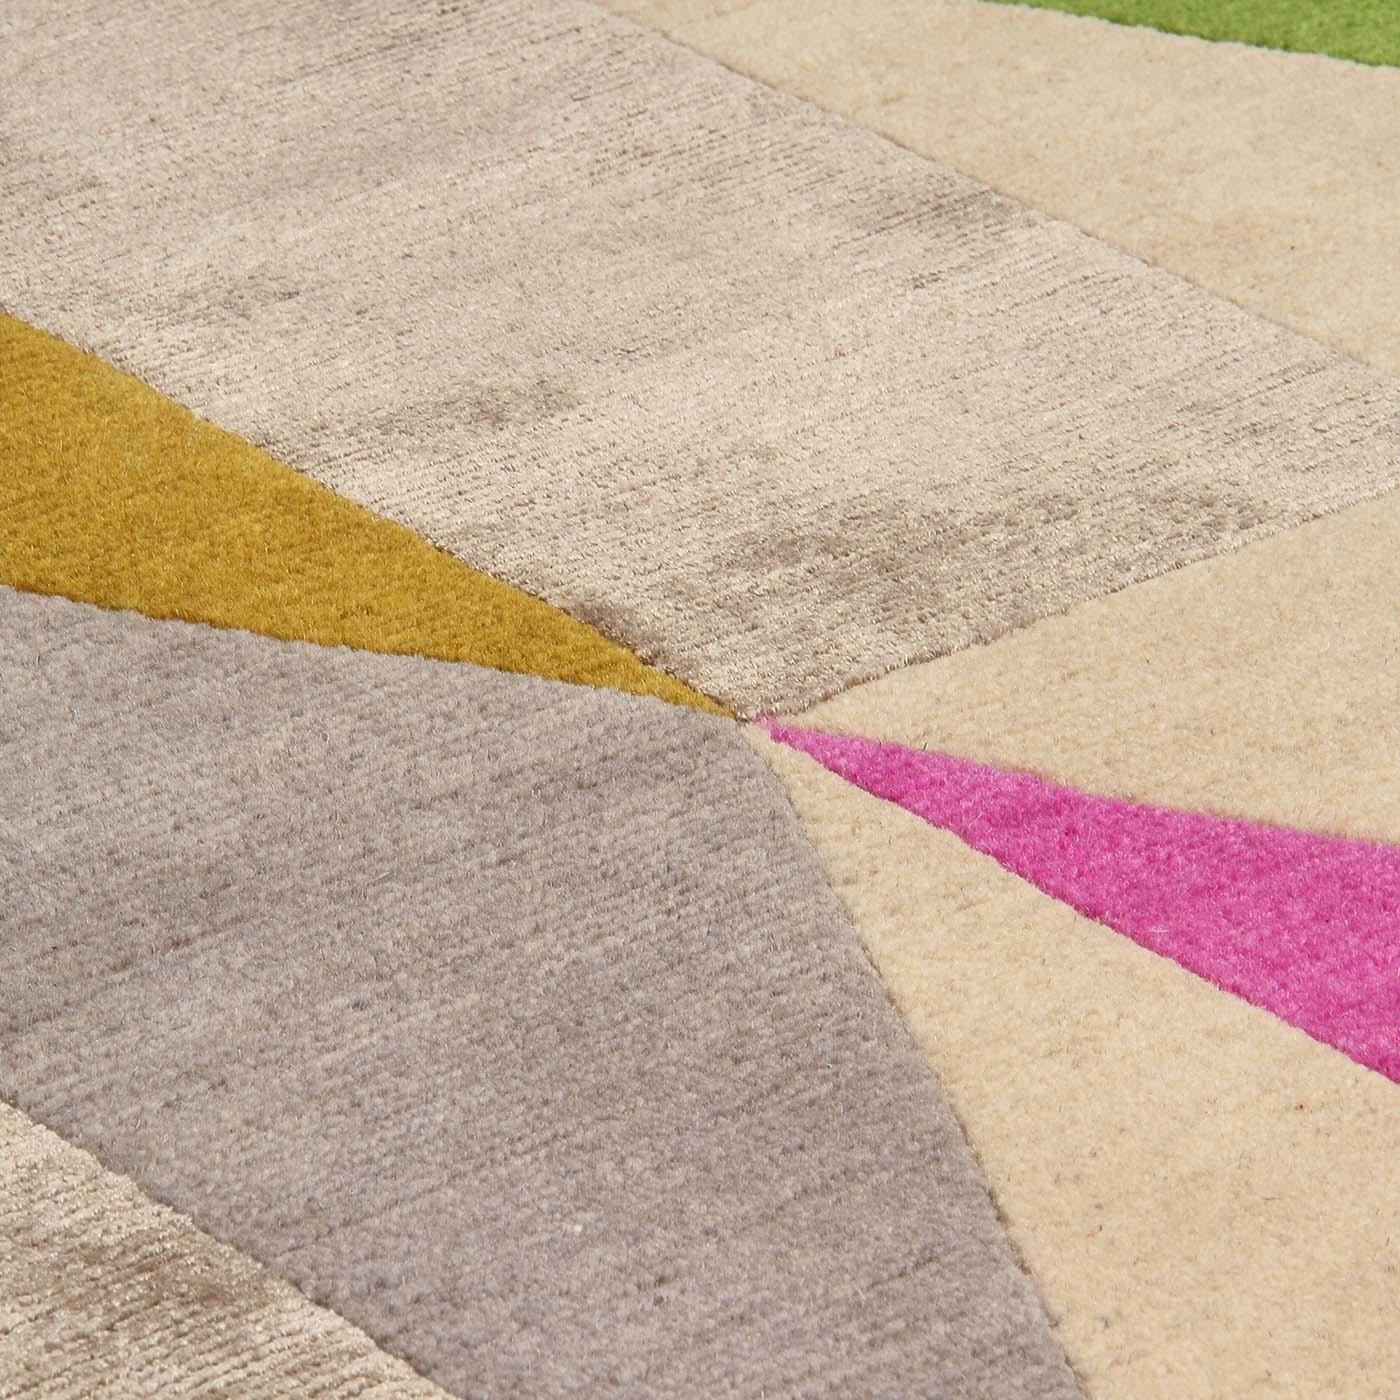 A sequence of triangles that turn into diamonds, thence to squares and rectangles displaying soft hues and slender shapes embellished with powerful colorful accents. From the original design of Gio Ponti, this Diamantina carpet's decoration